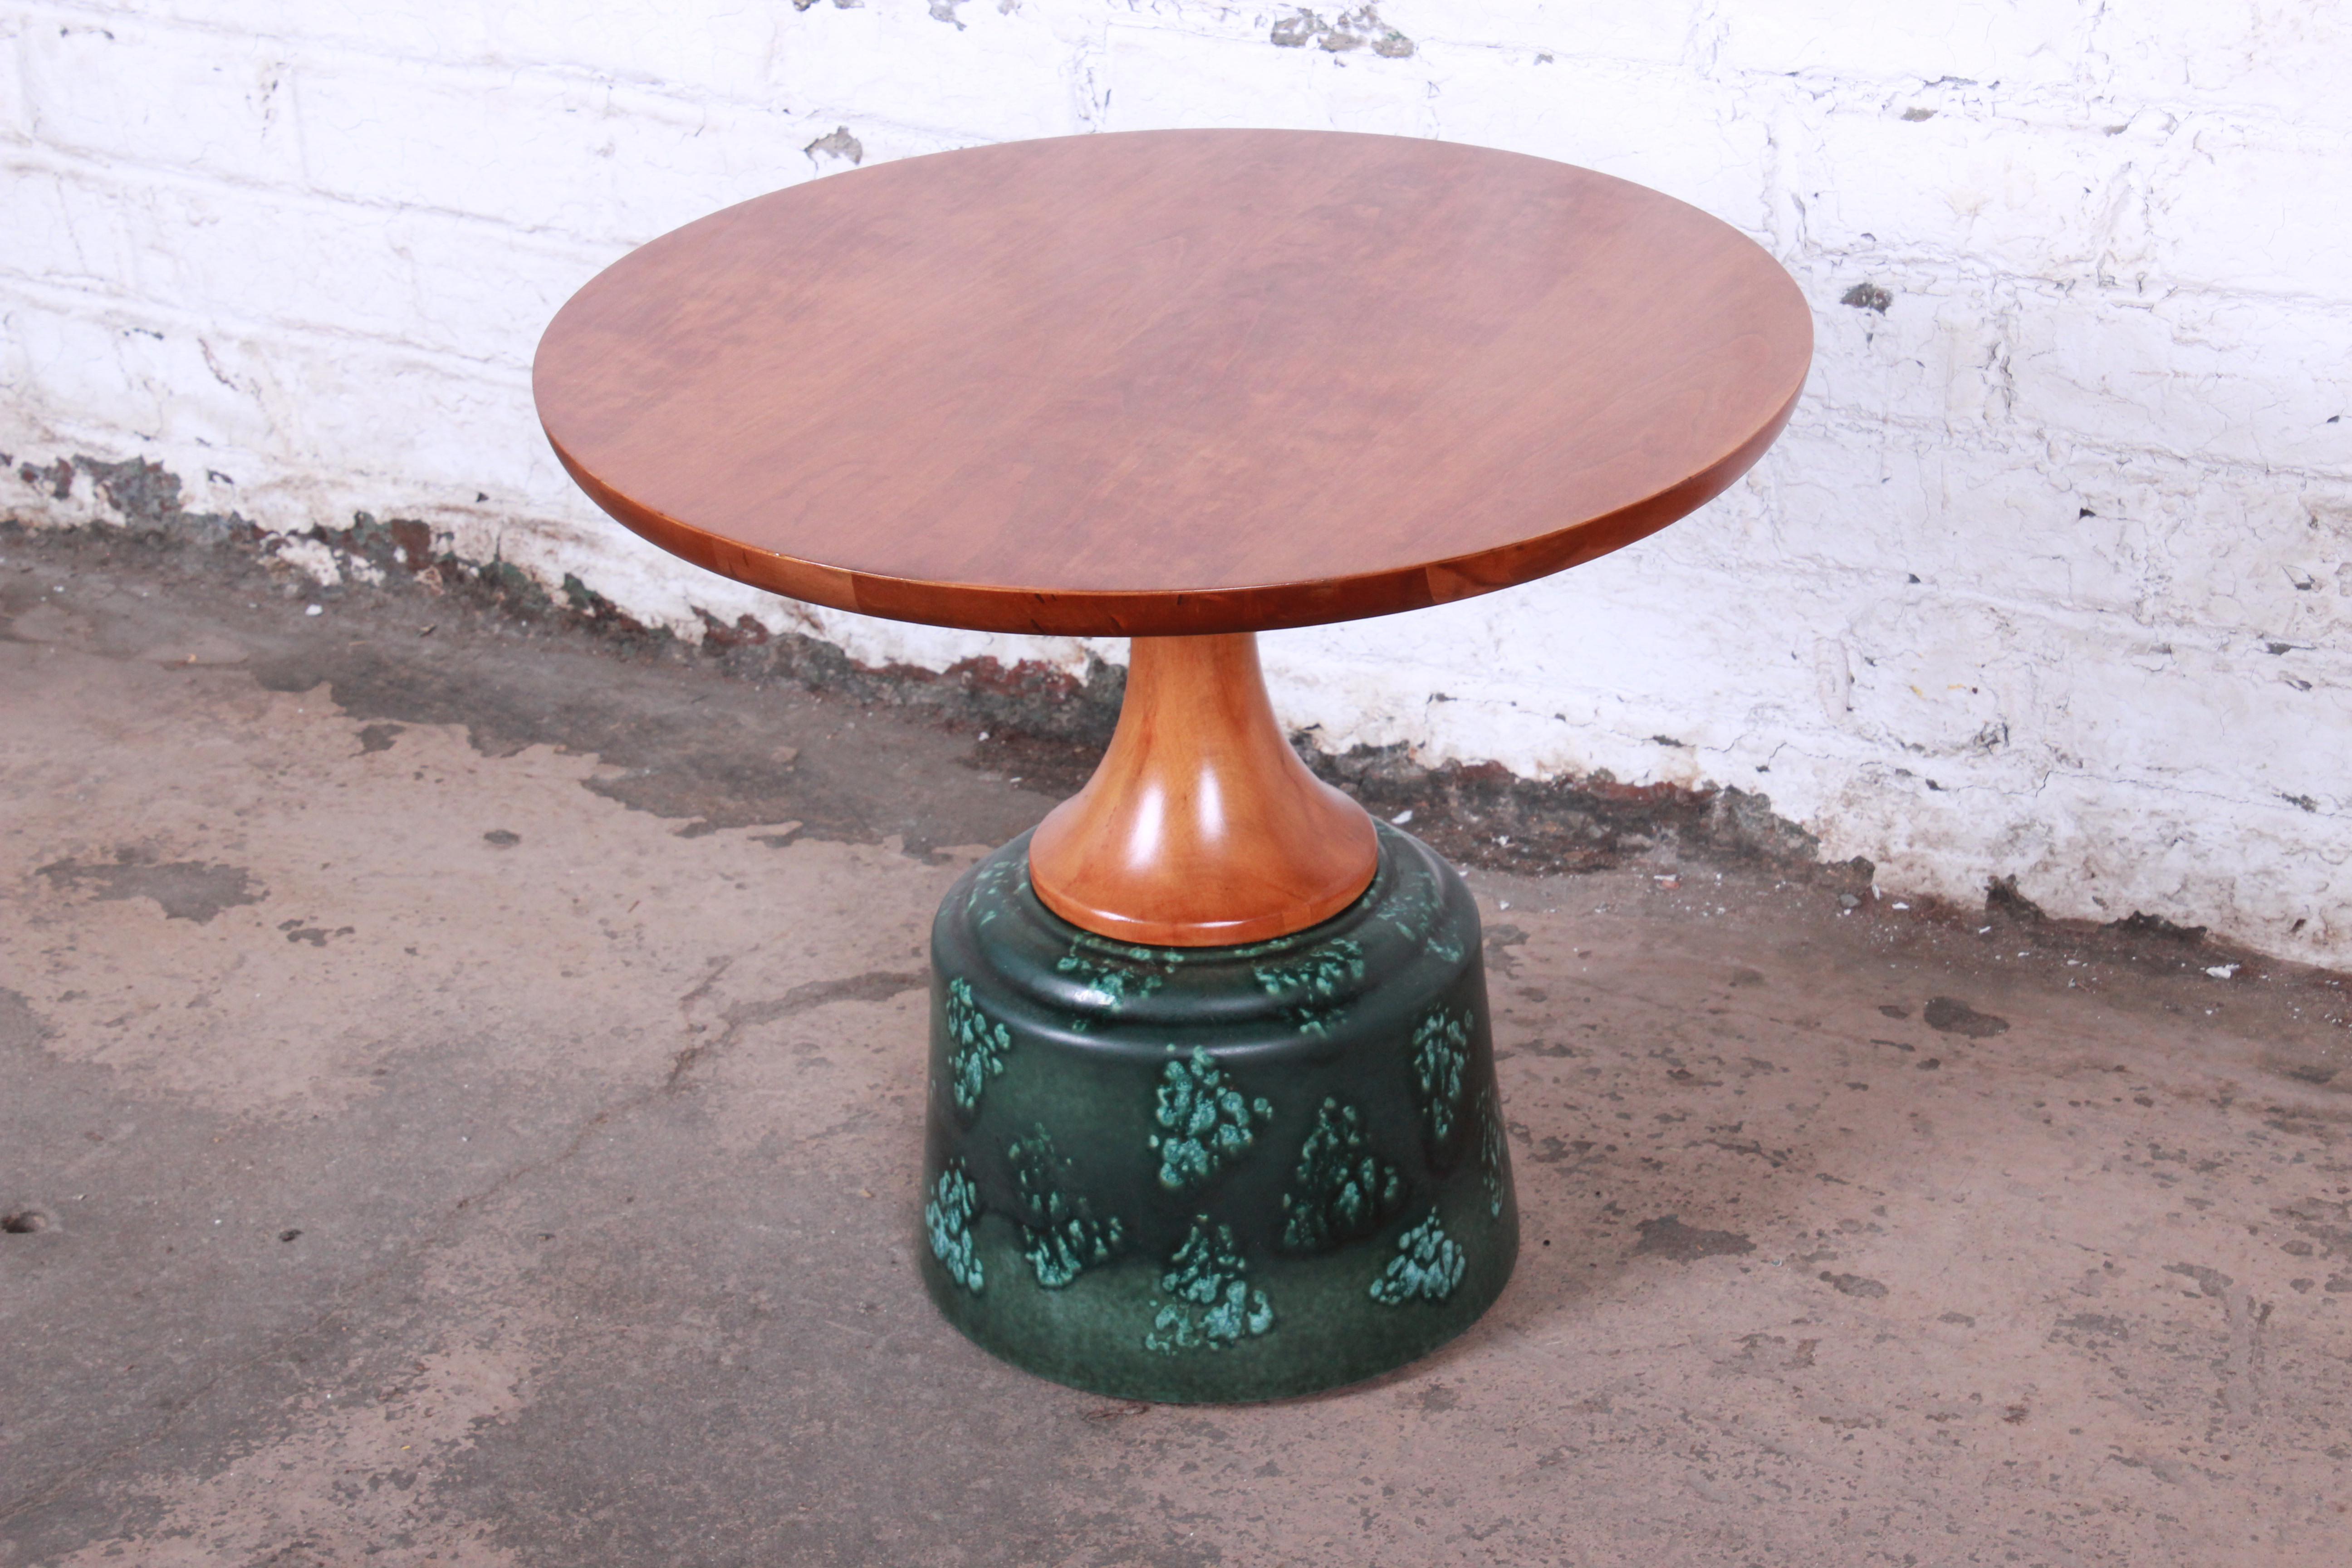 A rare and exceptional Mid-Century Modern occasional table designed by John Van Koert for Drexel Furniture. Van Koert combined Mid-Century Modern ceramics with fine woodwork to produce these exceptional tables in 1956. The table features a unique